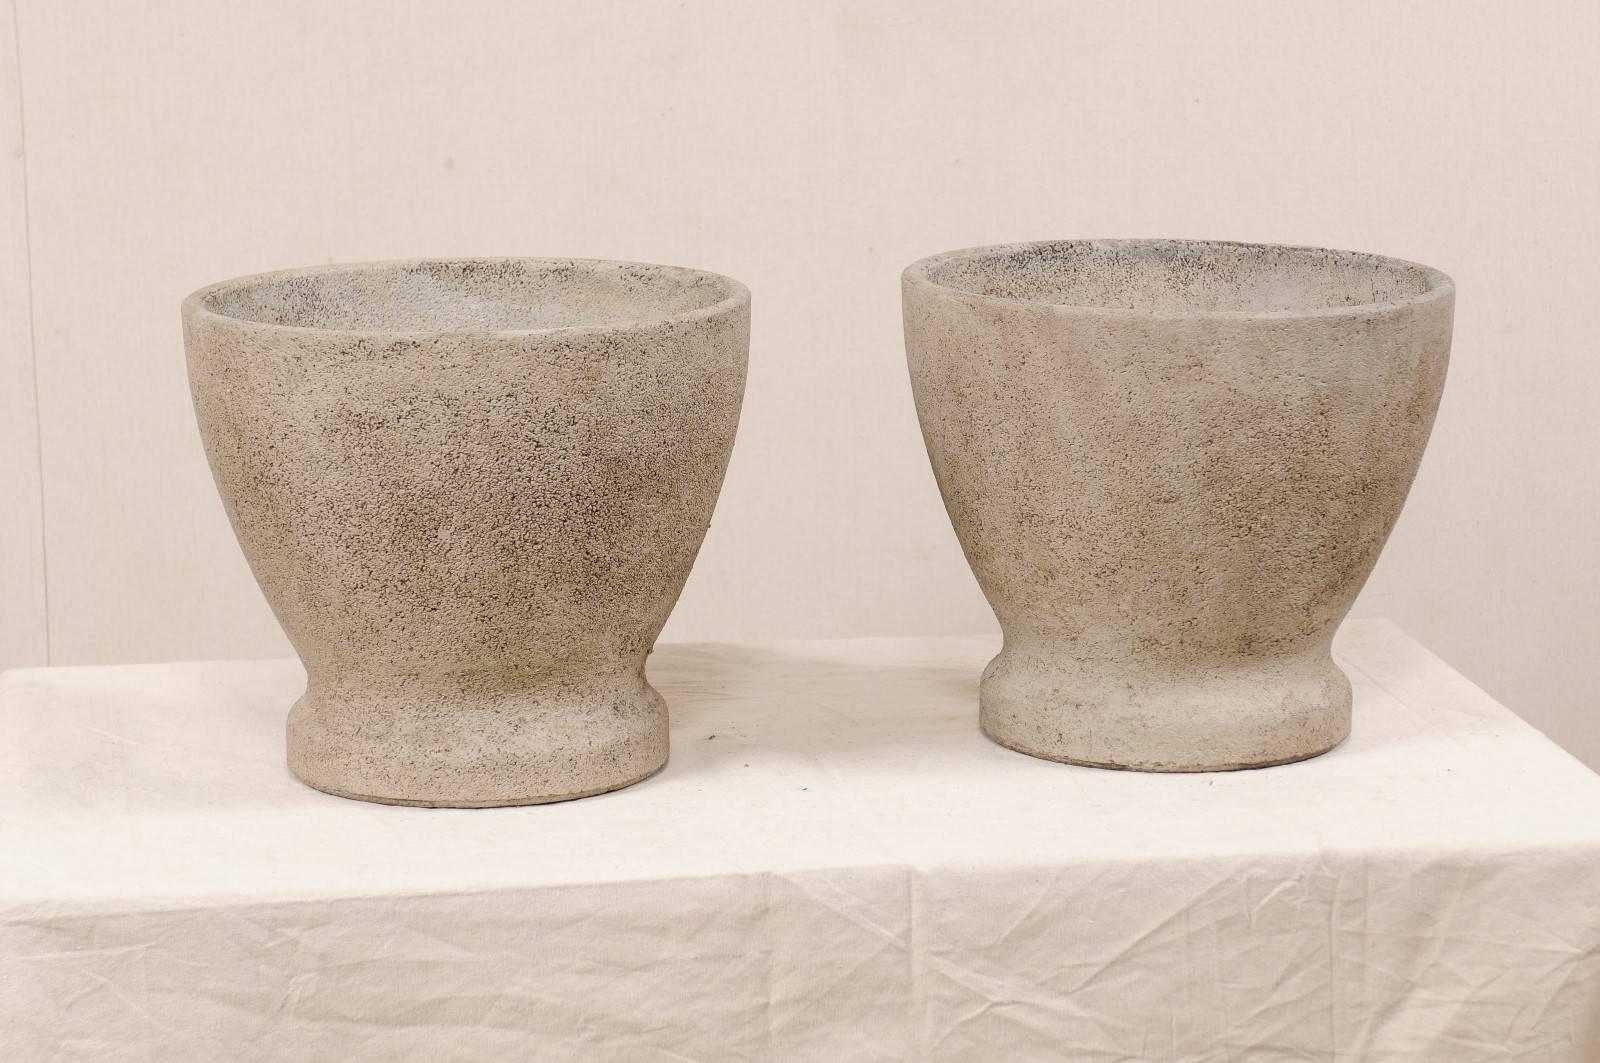 Pair of French Midcentury Cast Stone Round Planters in Natural Grey Hues 2